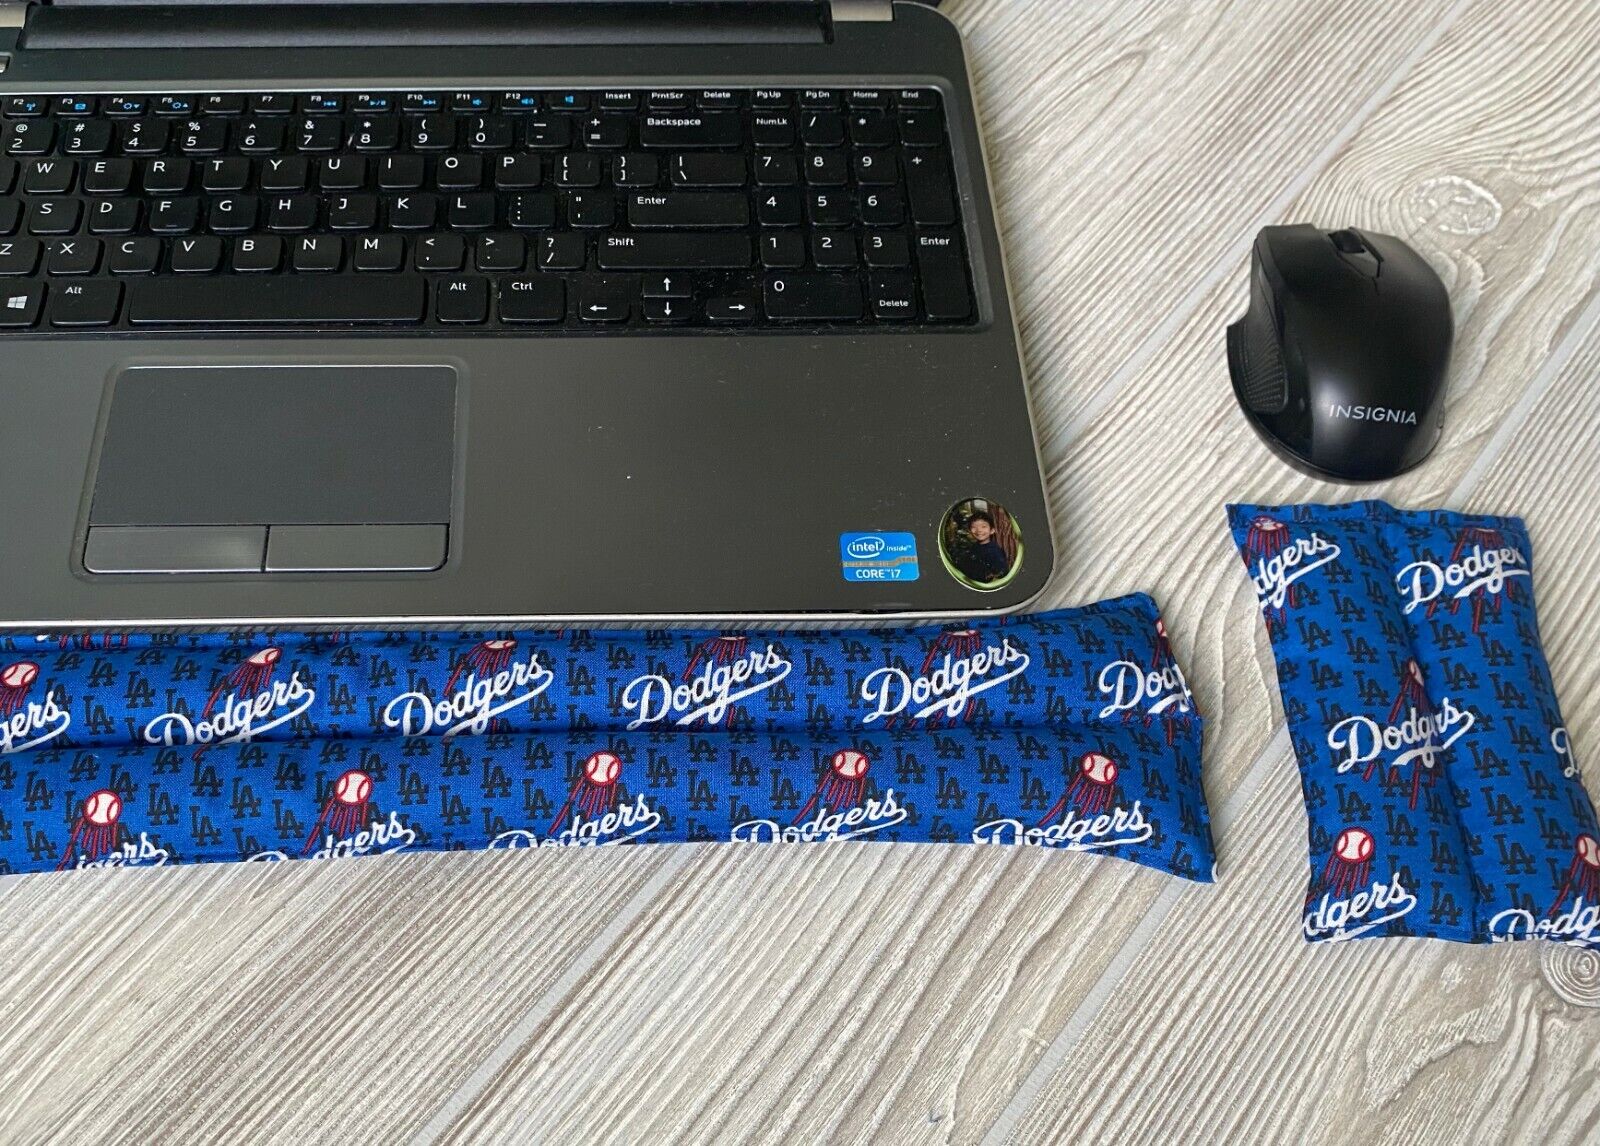 Dodgers Gifts Father’s Day Mouse And keyboard wrist rest pad,MLB Gifts for Dad